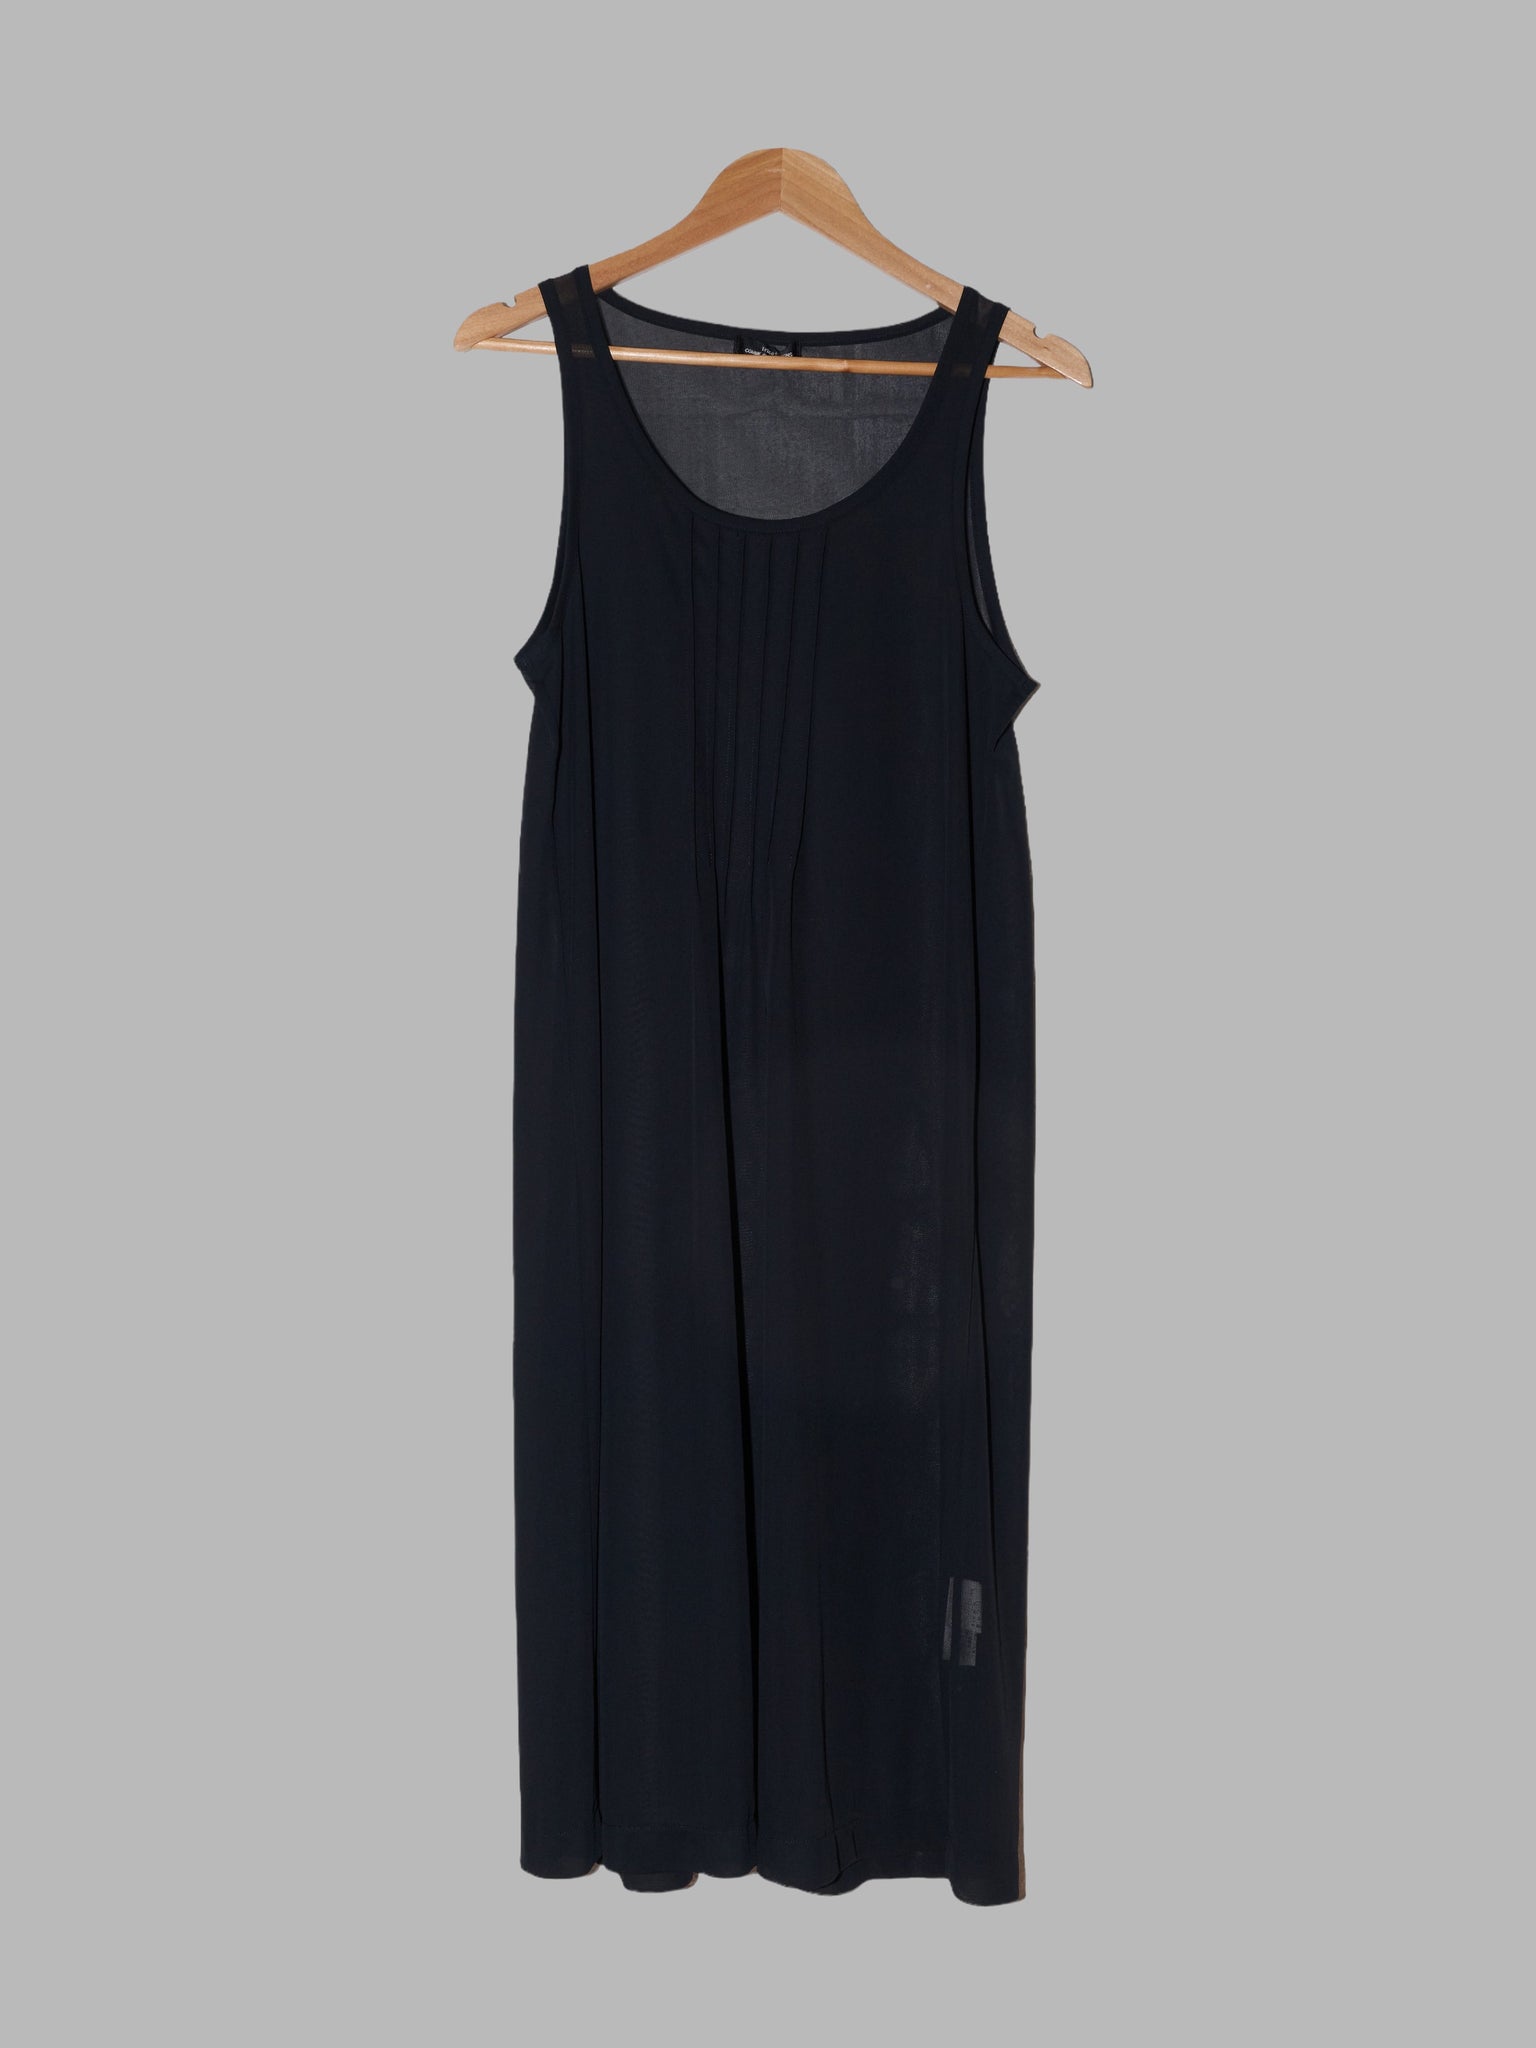 Tricot Comme des Garcons 1995 sheer black poly georgette sleeveless dress